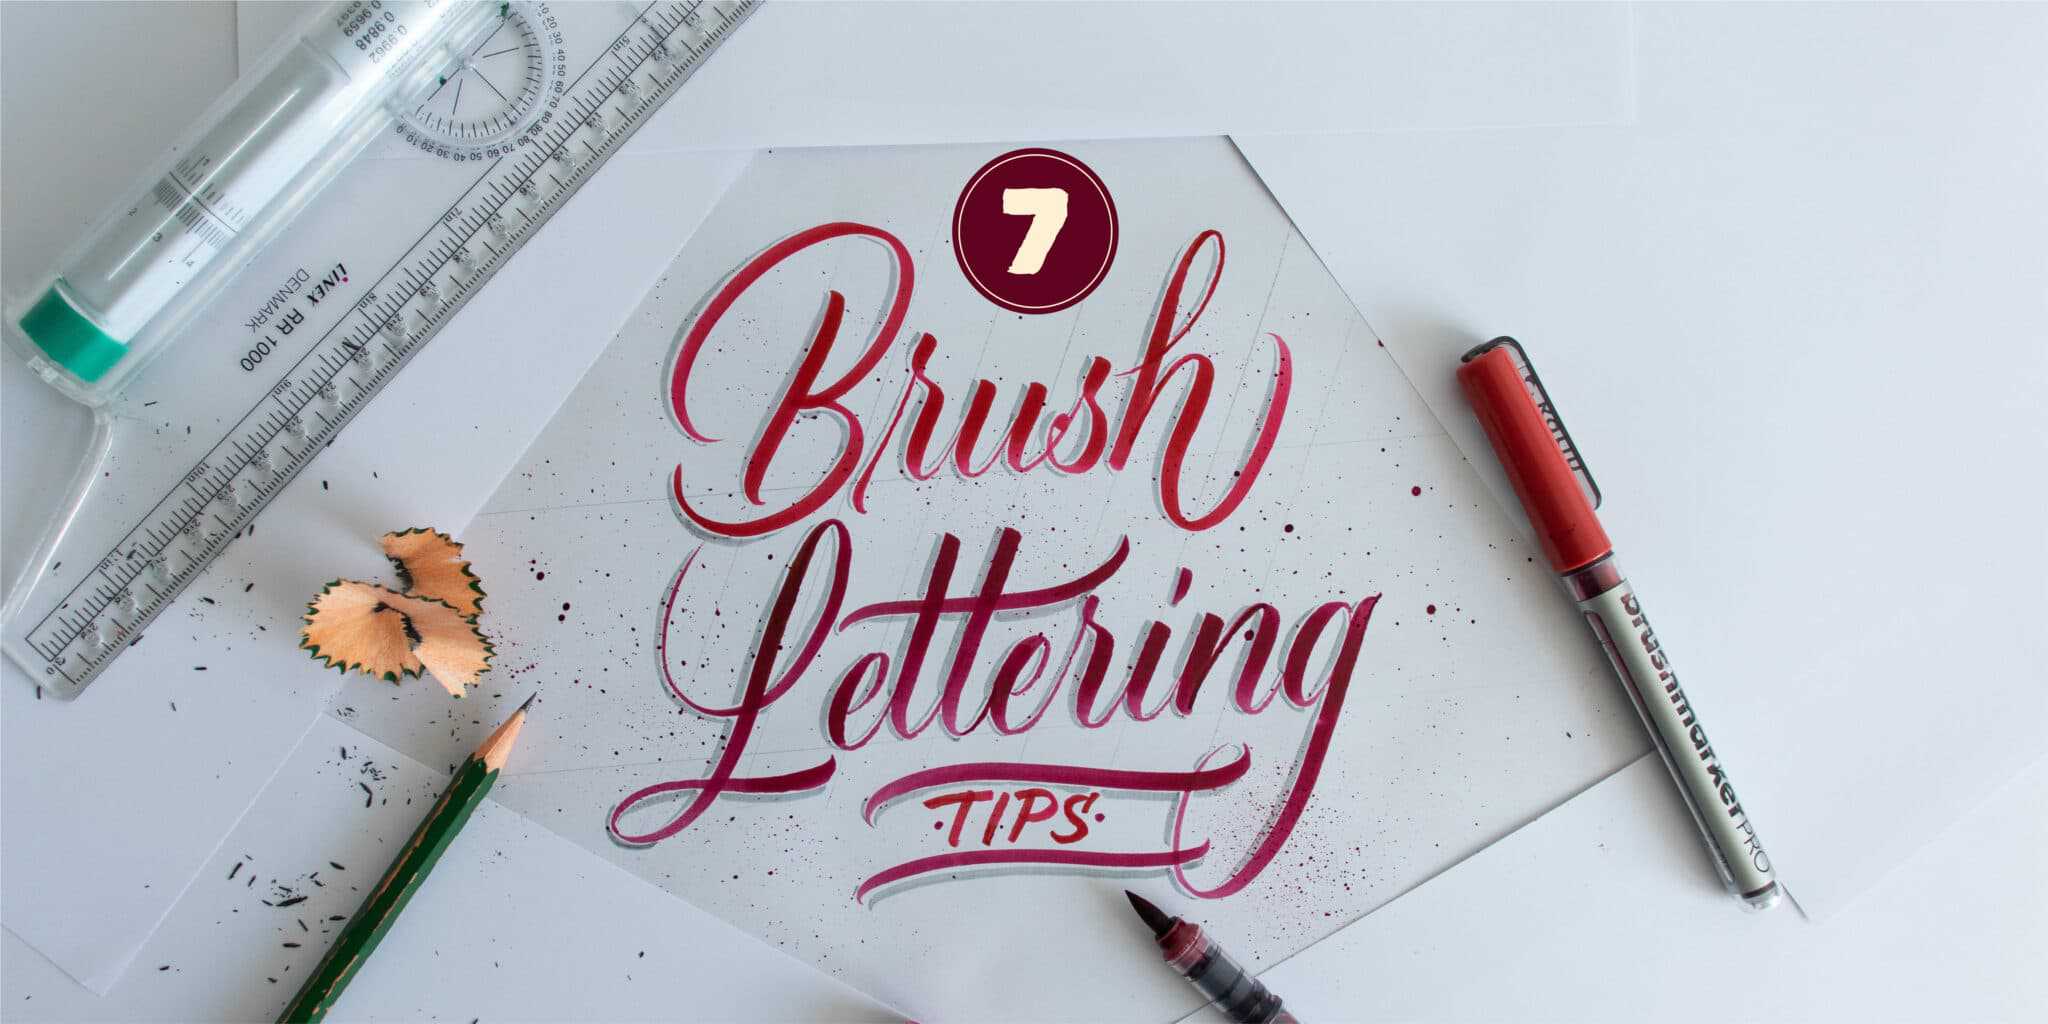 Beginner Brush Lettering - The Basic Tools and Techniques